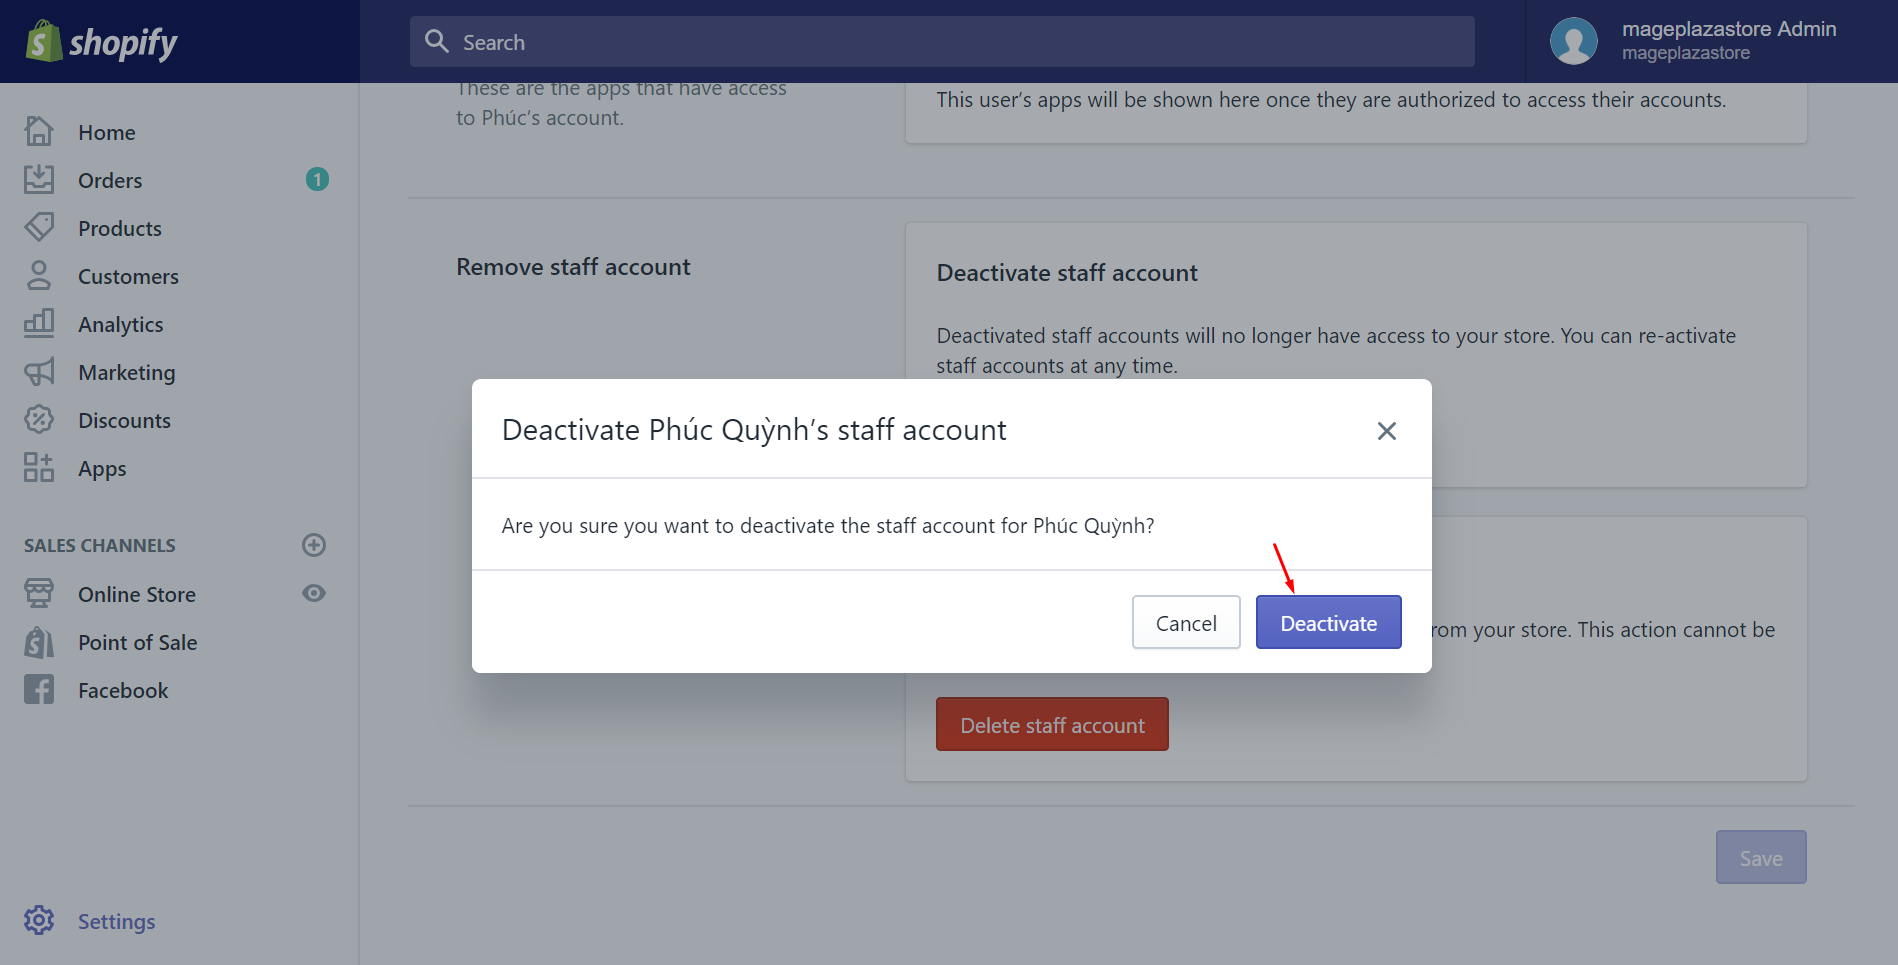 How to deactivate a staff account